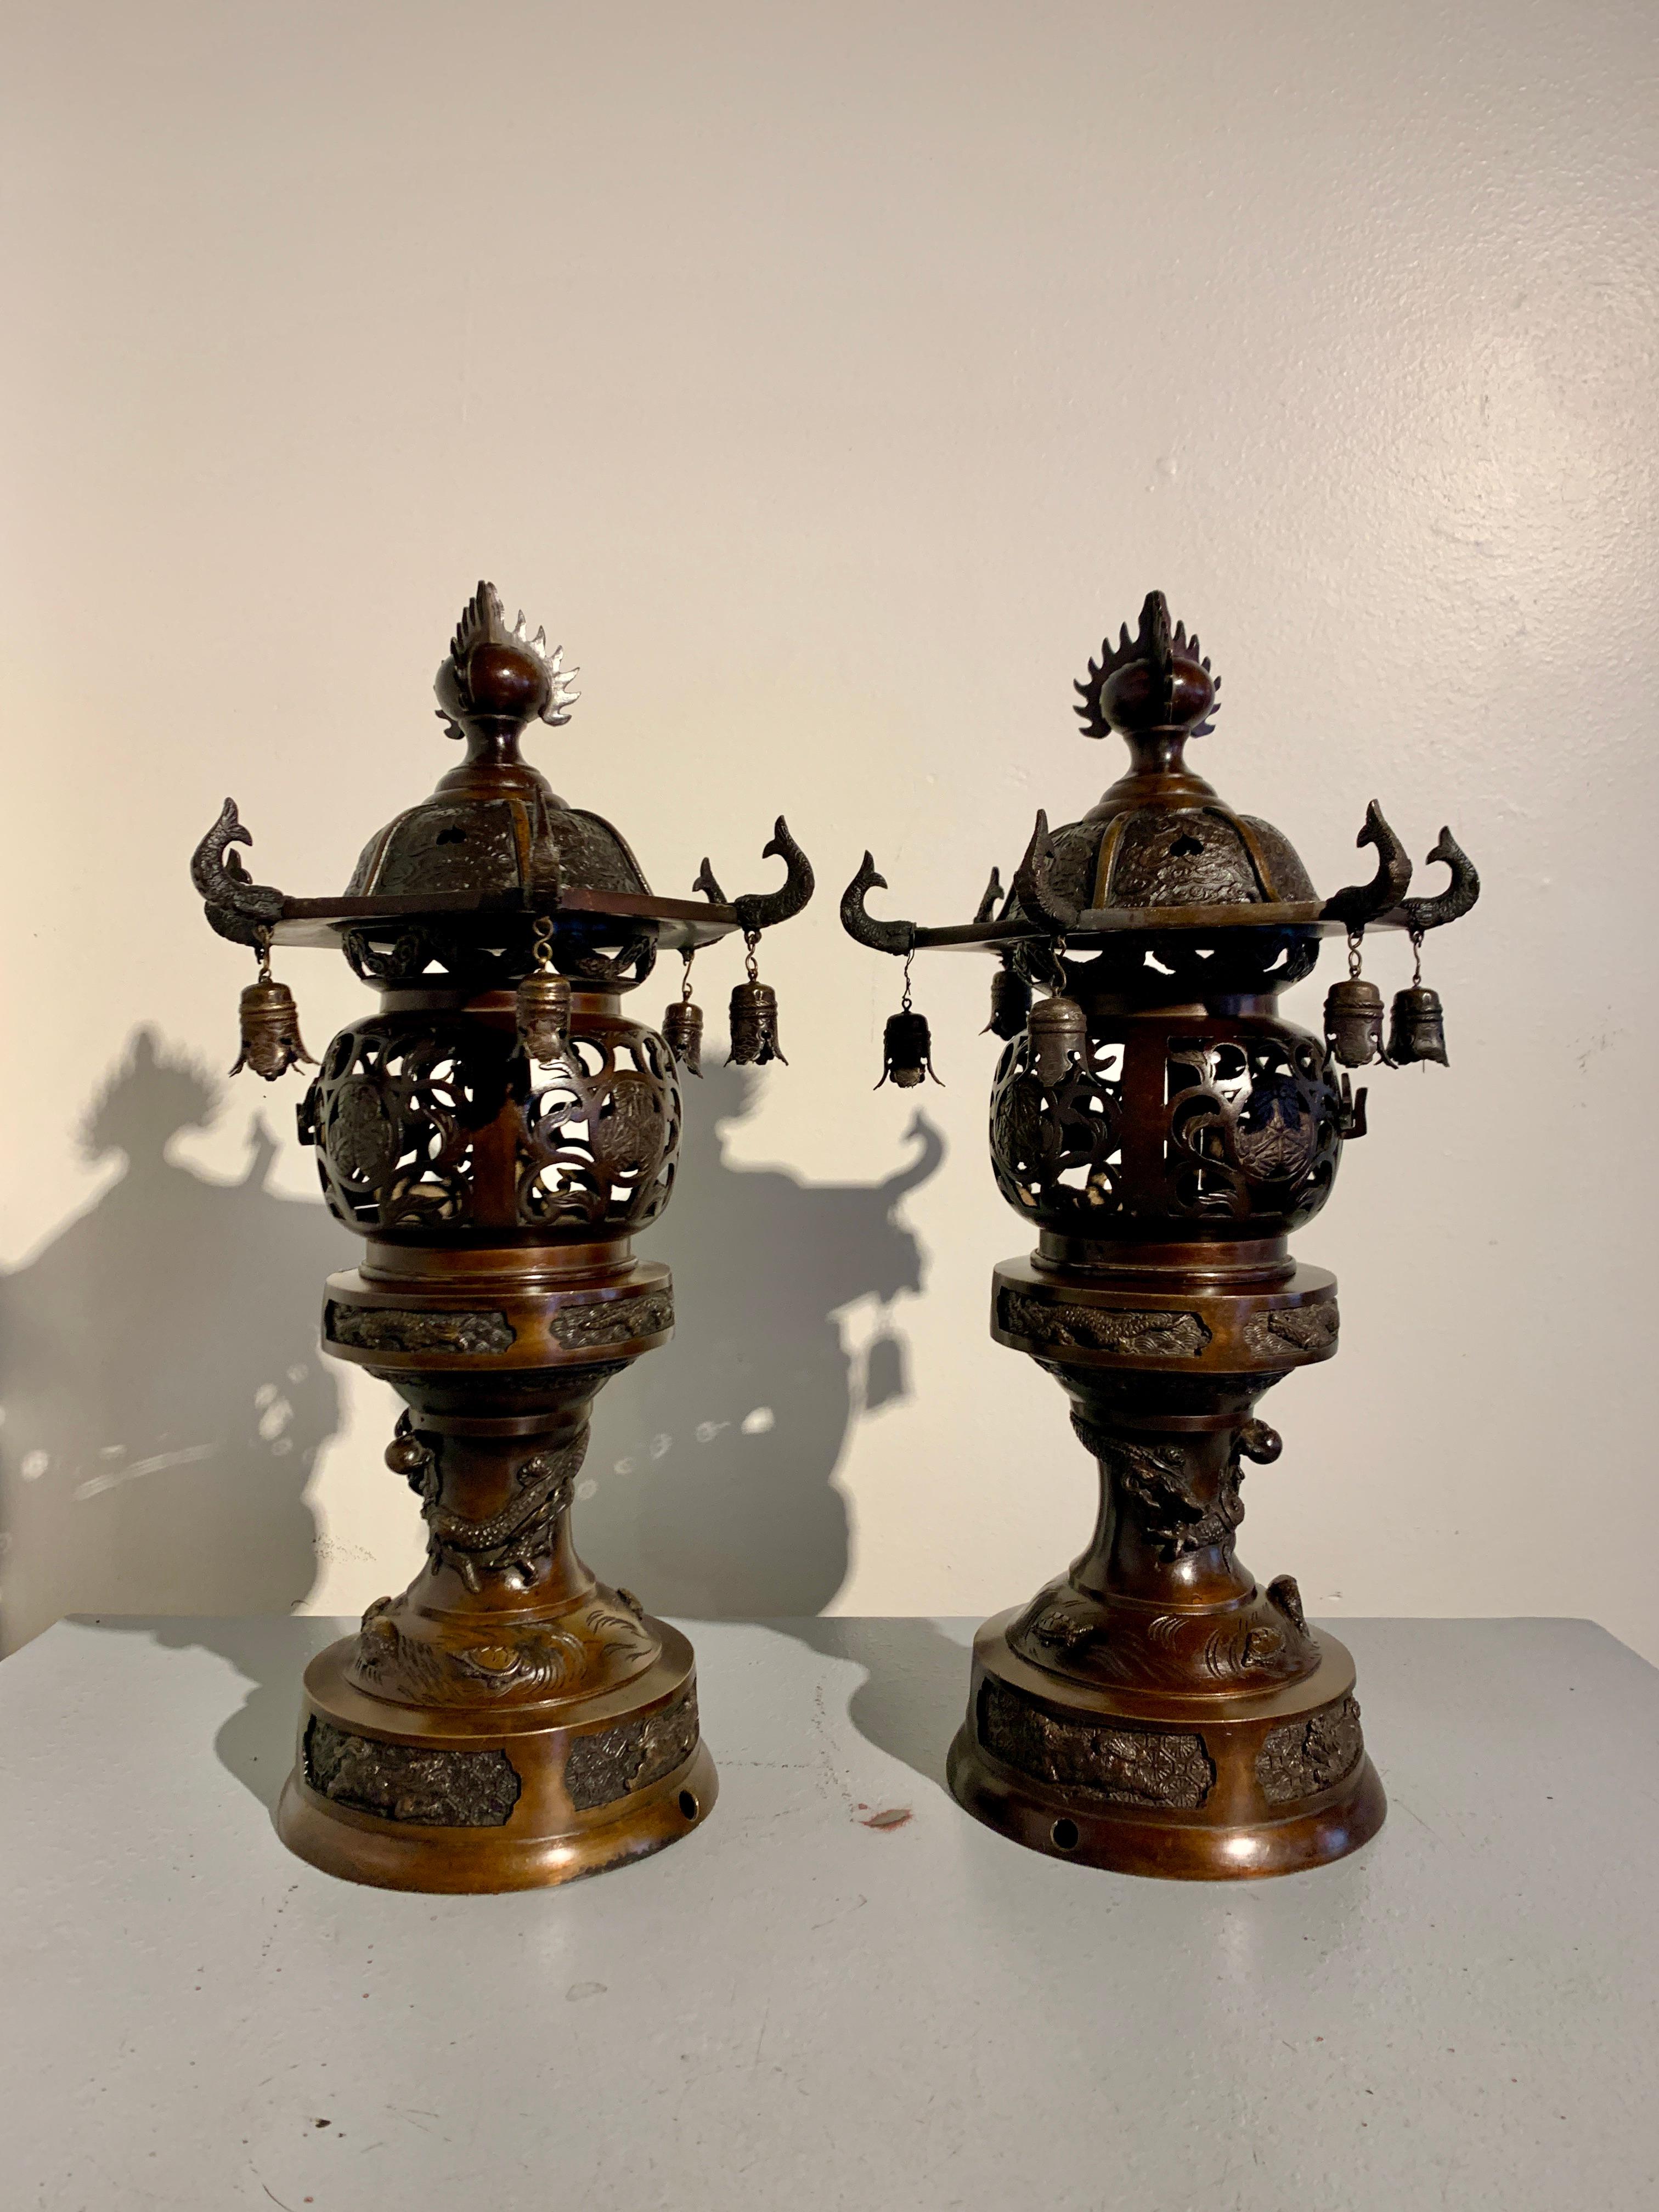 An elegant pair of Japanese cast and lacquered bronze pagoda lanterns, Taisho Period, circa 1920, Japan.

The lanterns a true pair, with mirrored decorations and lantern doors opening in opposite directions. The lanterns of traditional toro form,